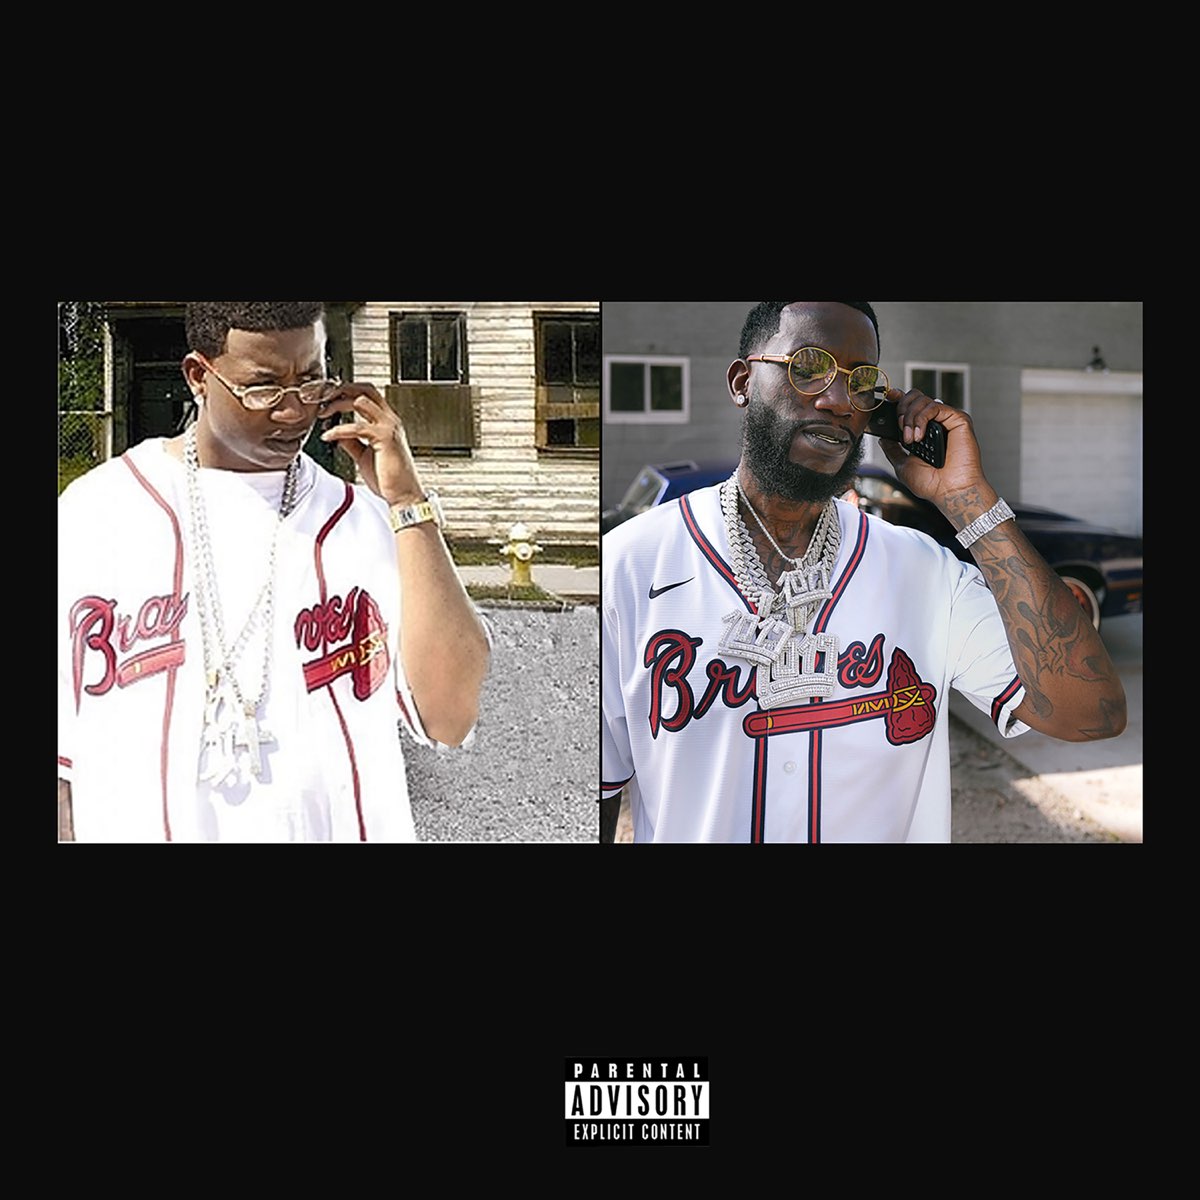 06 Gucci (feat. DaBaby & 21 Savage) - Single - Album by Gucci Mane